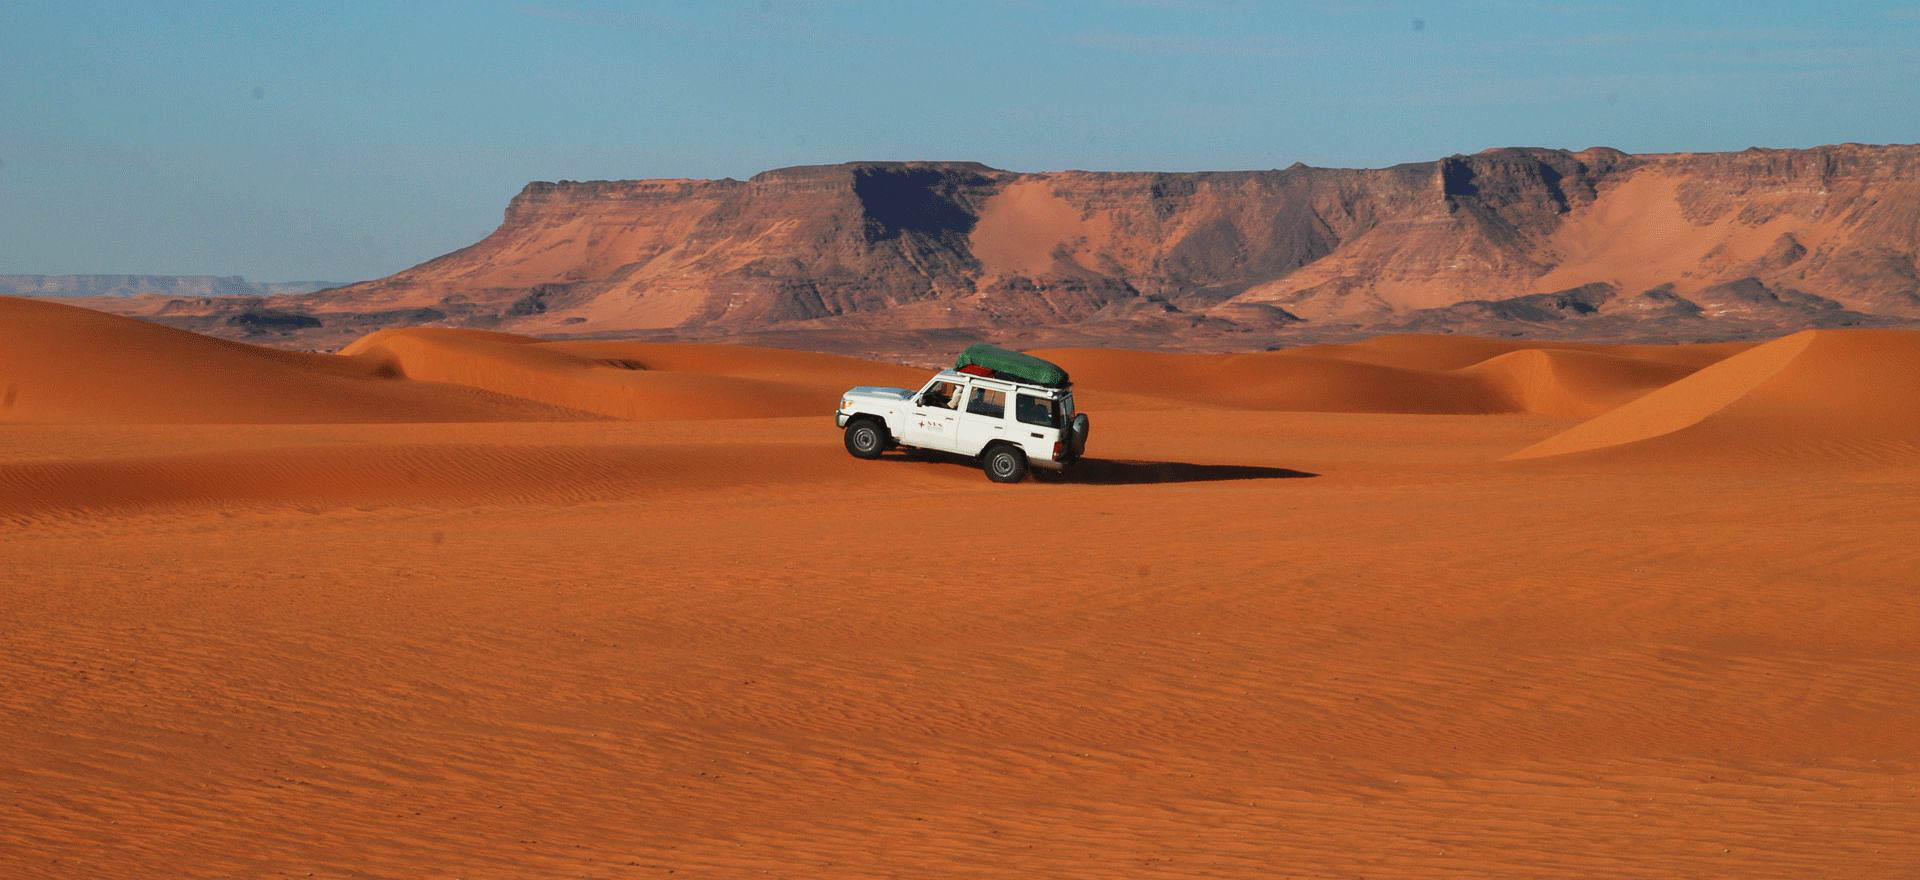 Vehicle driving in the Mourdi Depression - Chad holidays